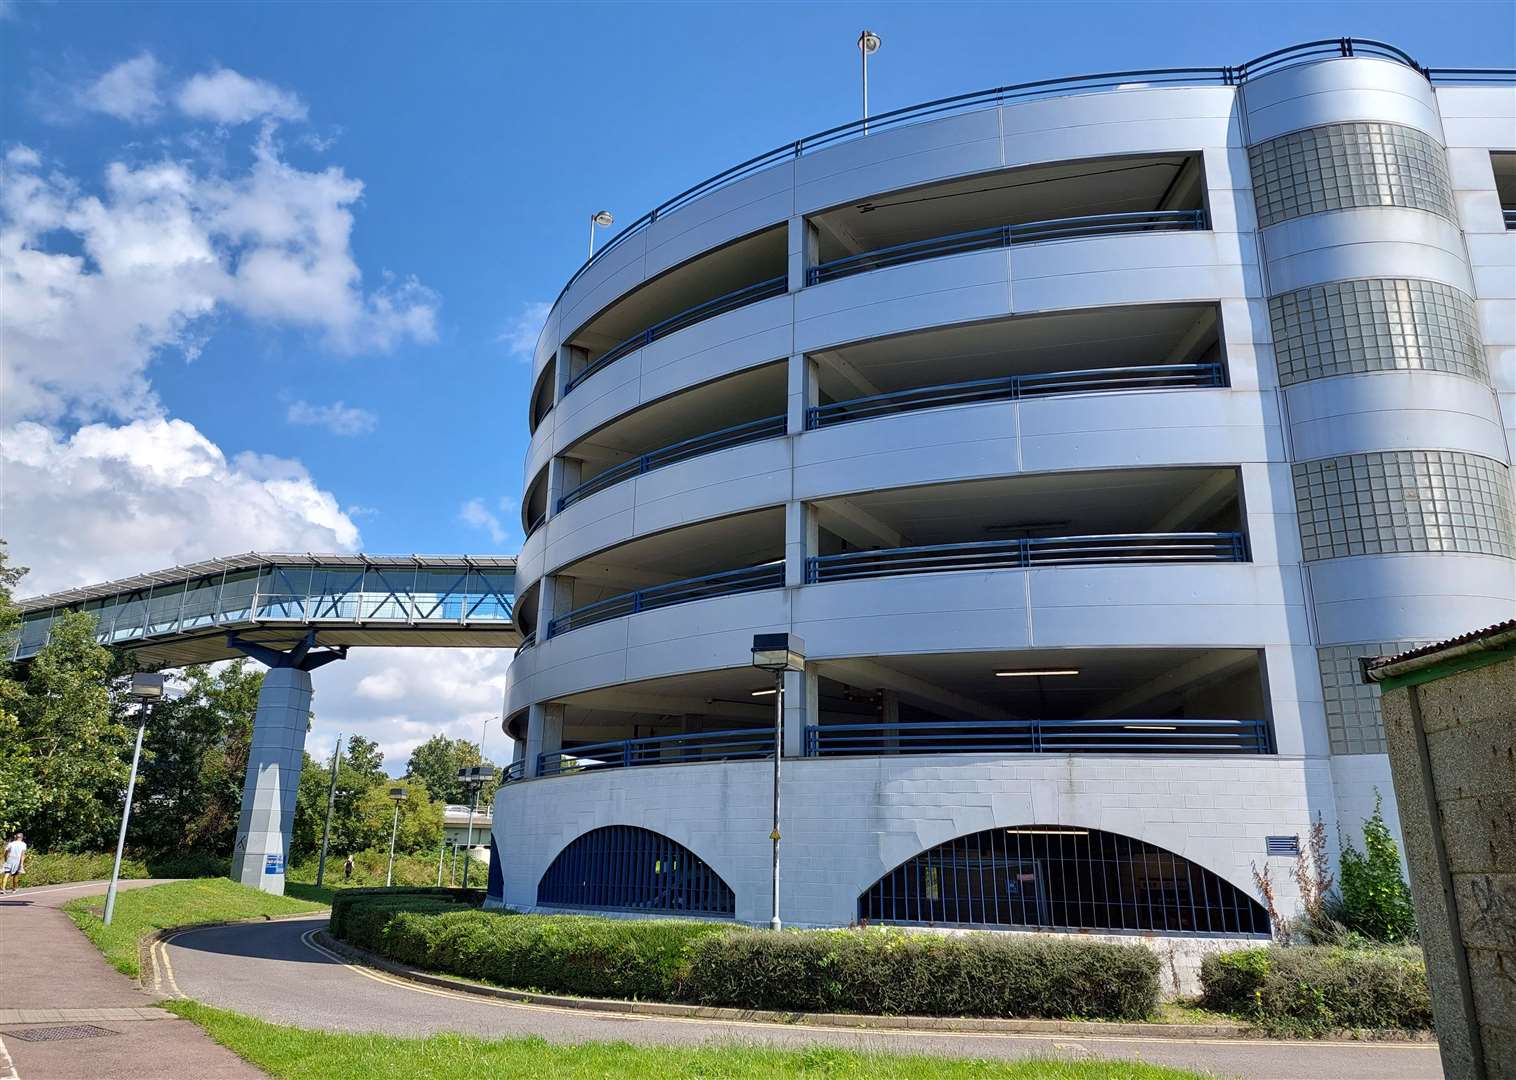 The Eurostar multi-storey car park is a 19-minute walk from the proposed Brompton factory site